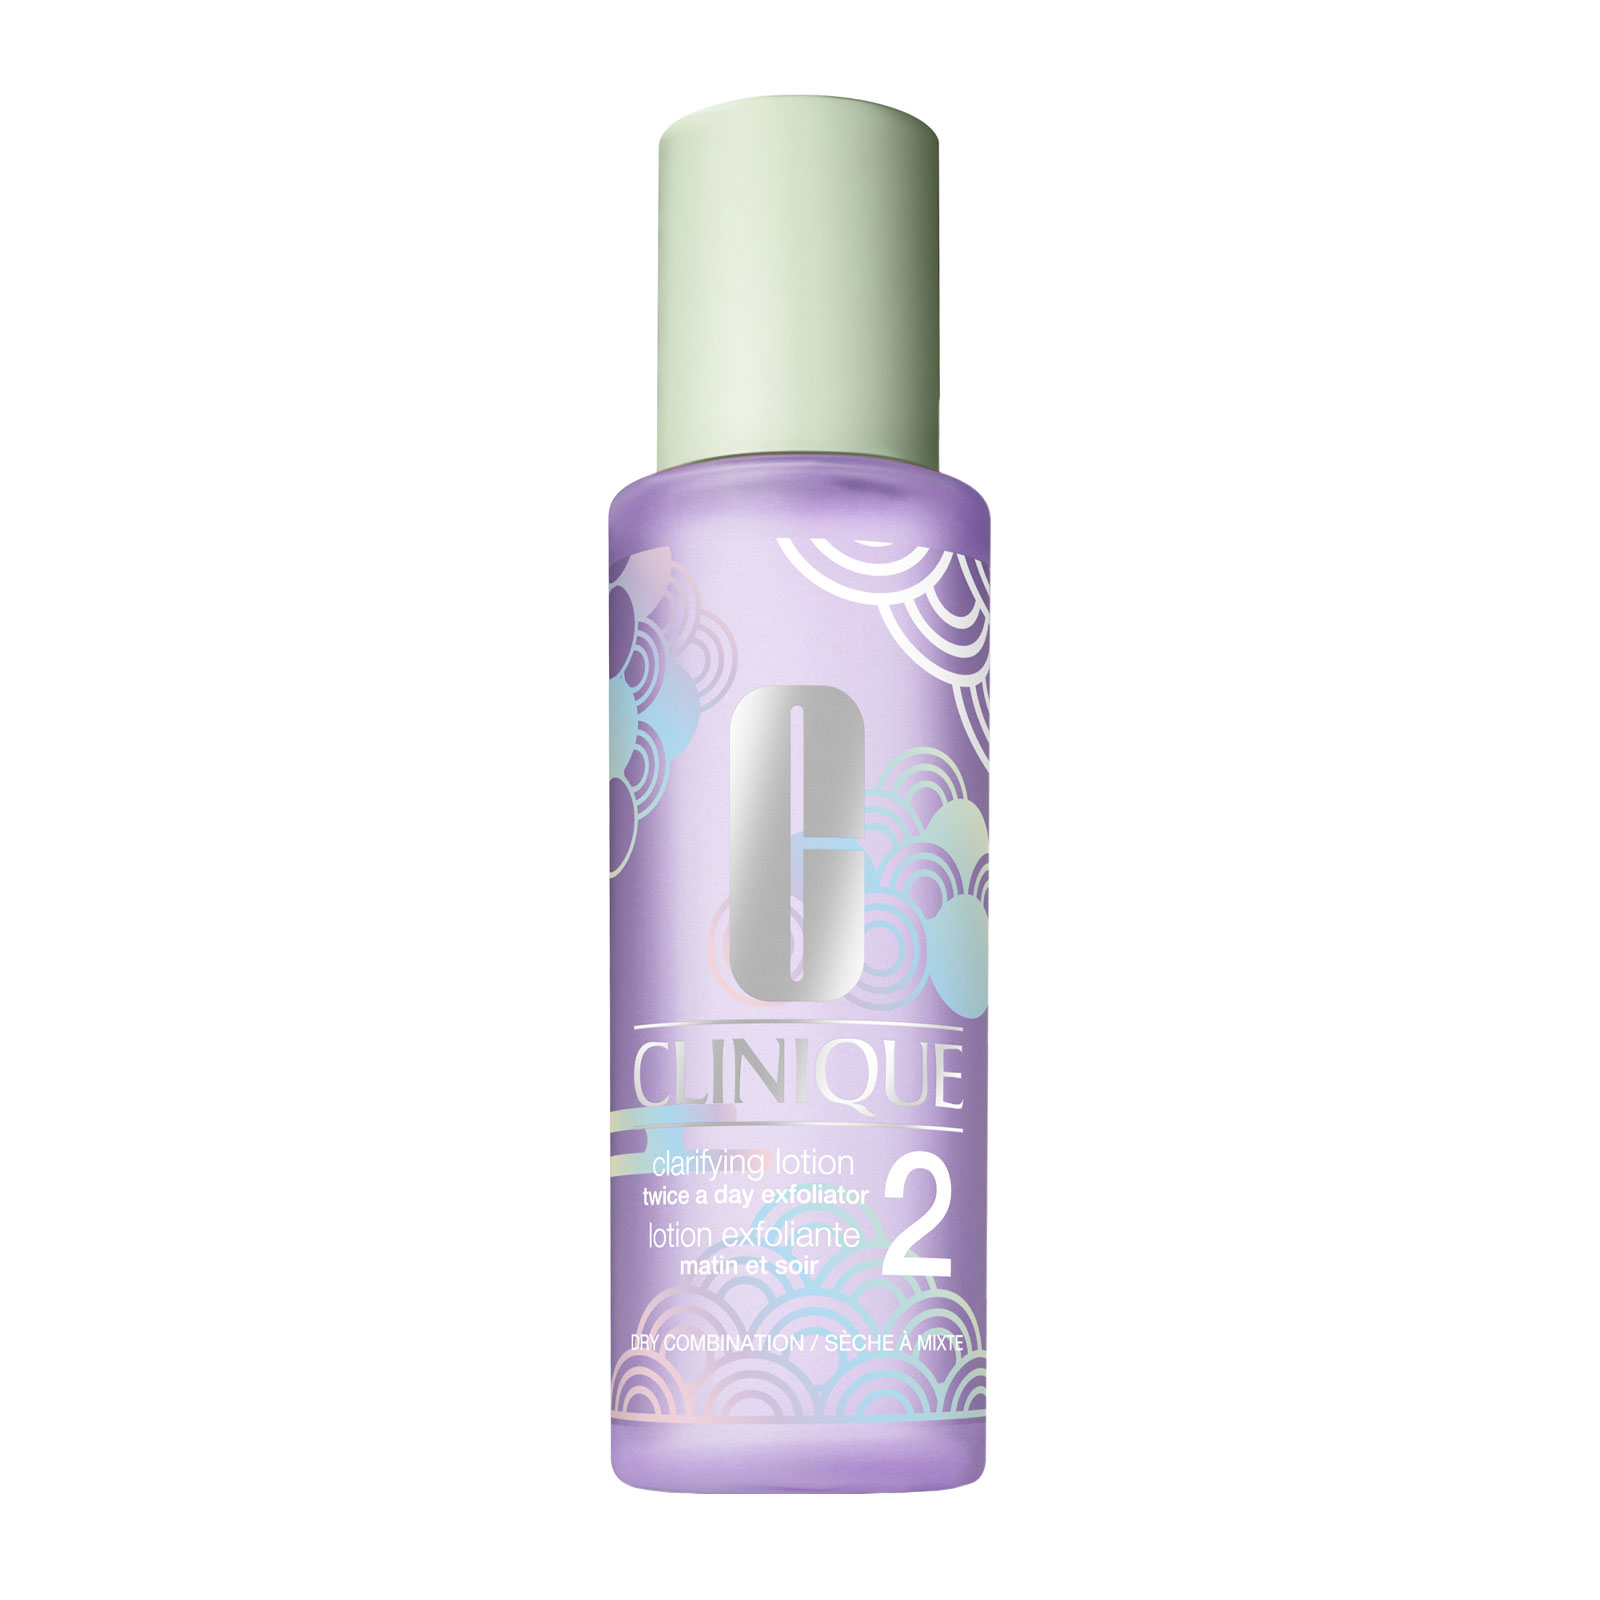 Clinique Decorative Clarifying Lotion 2 200ml Limited Edition